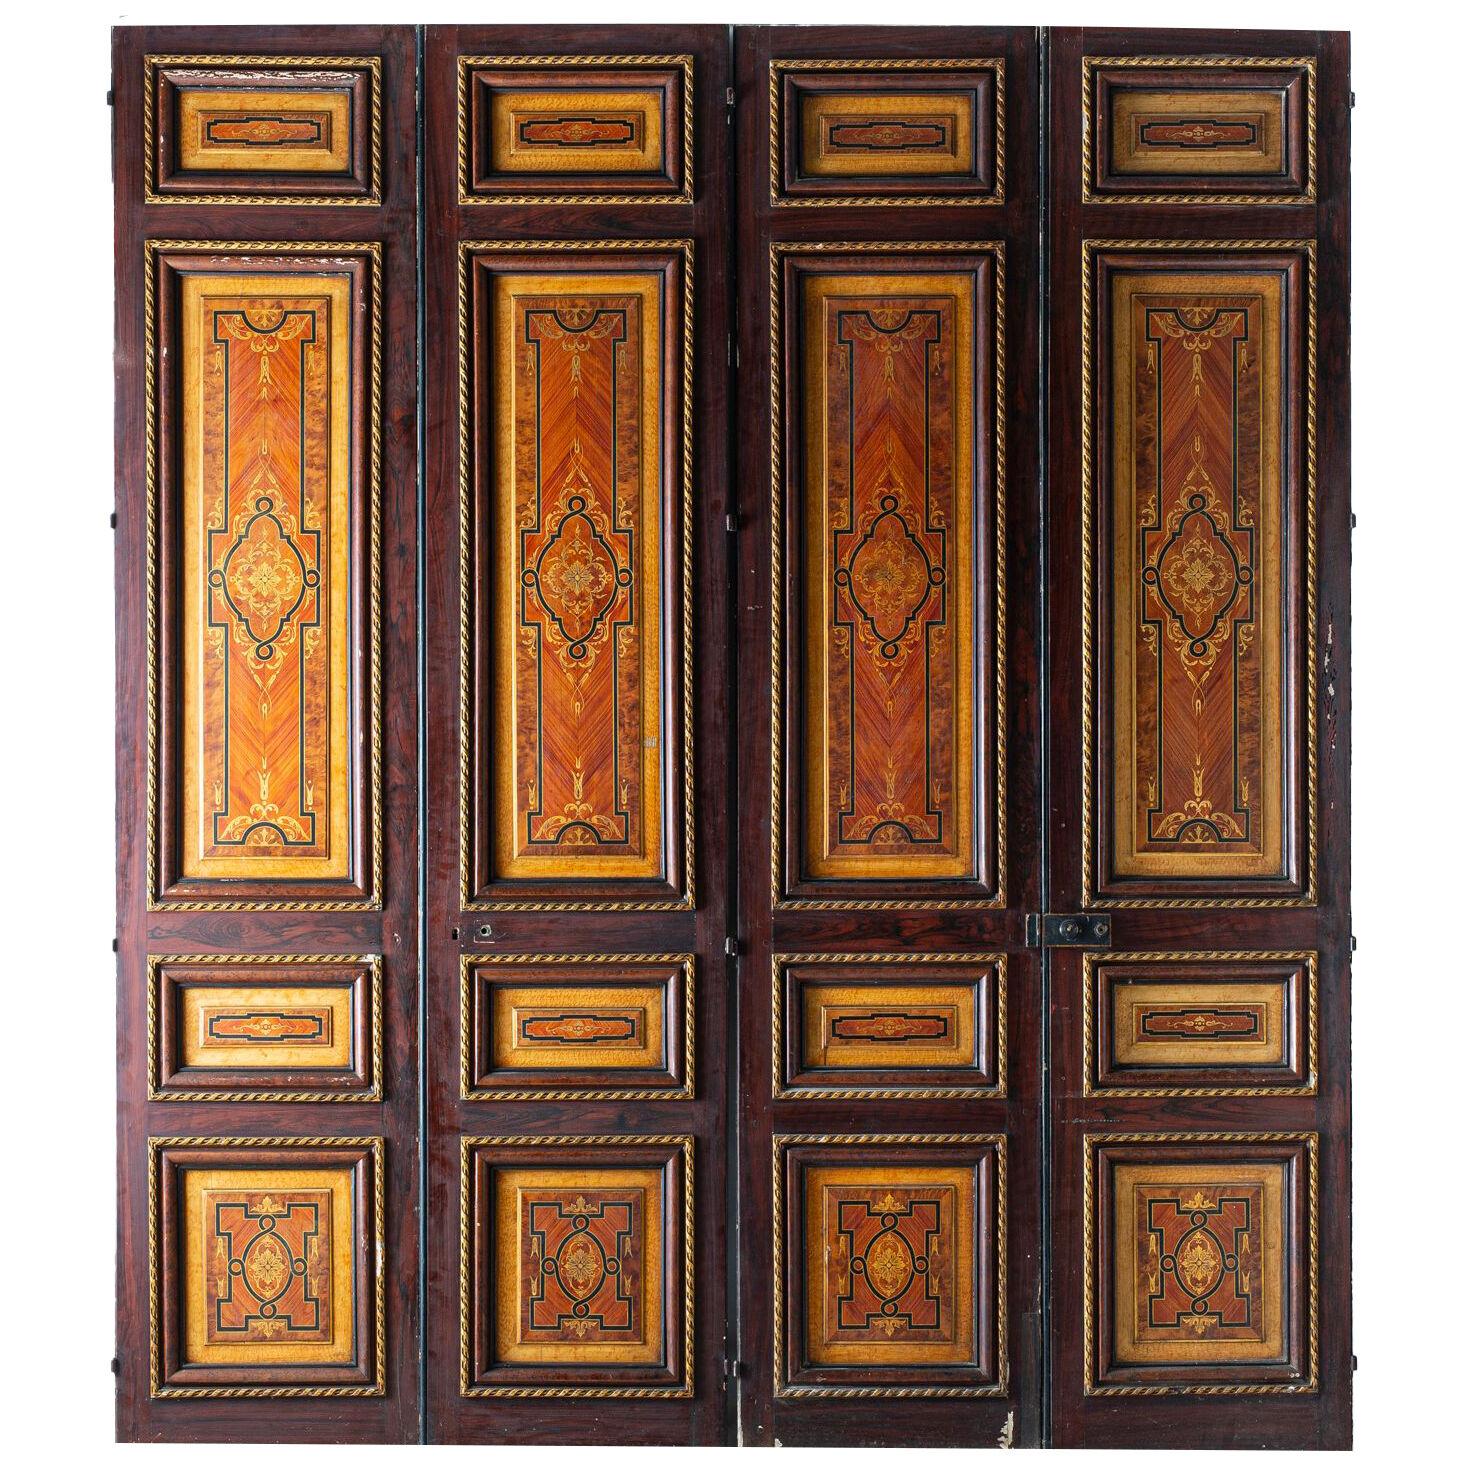 Three pairs of 19th century oak double-doors painted in imitation of marquetry